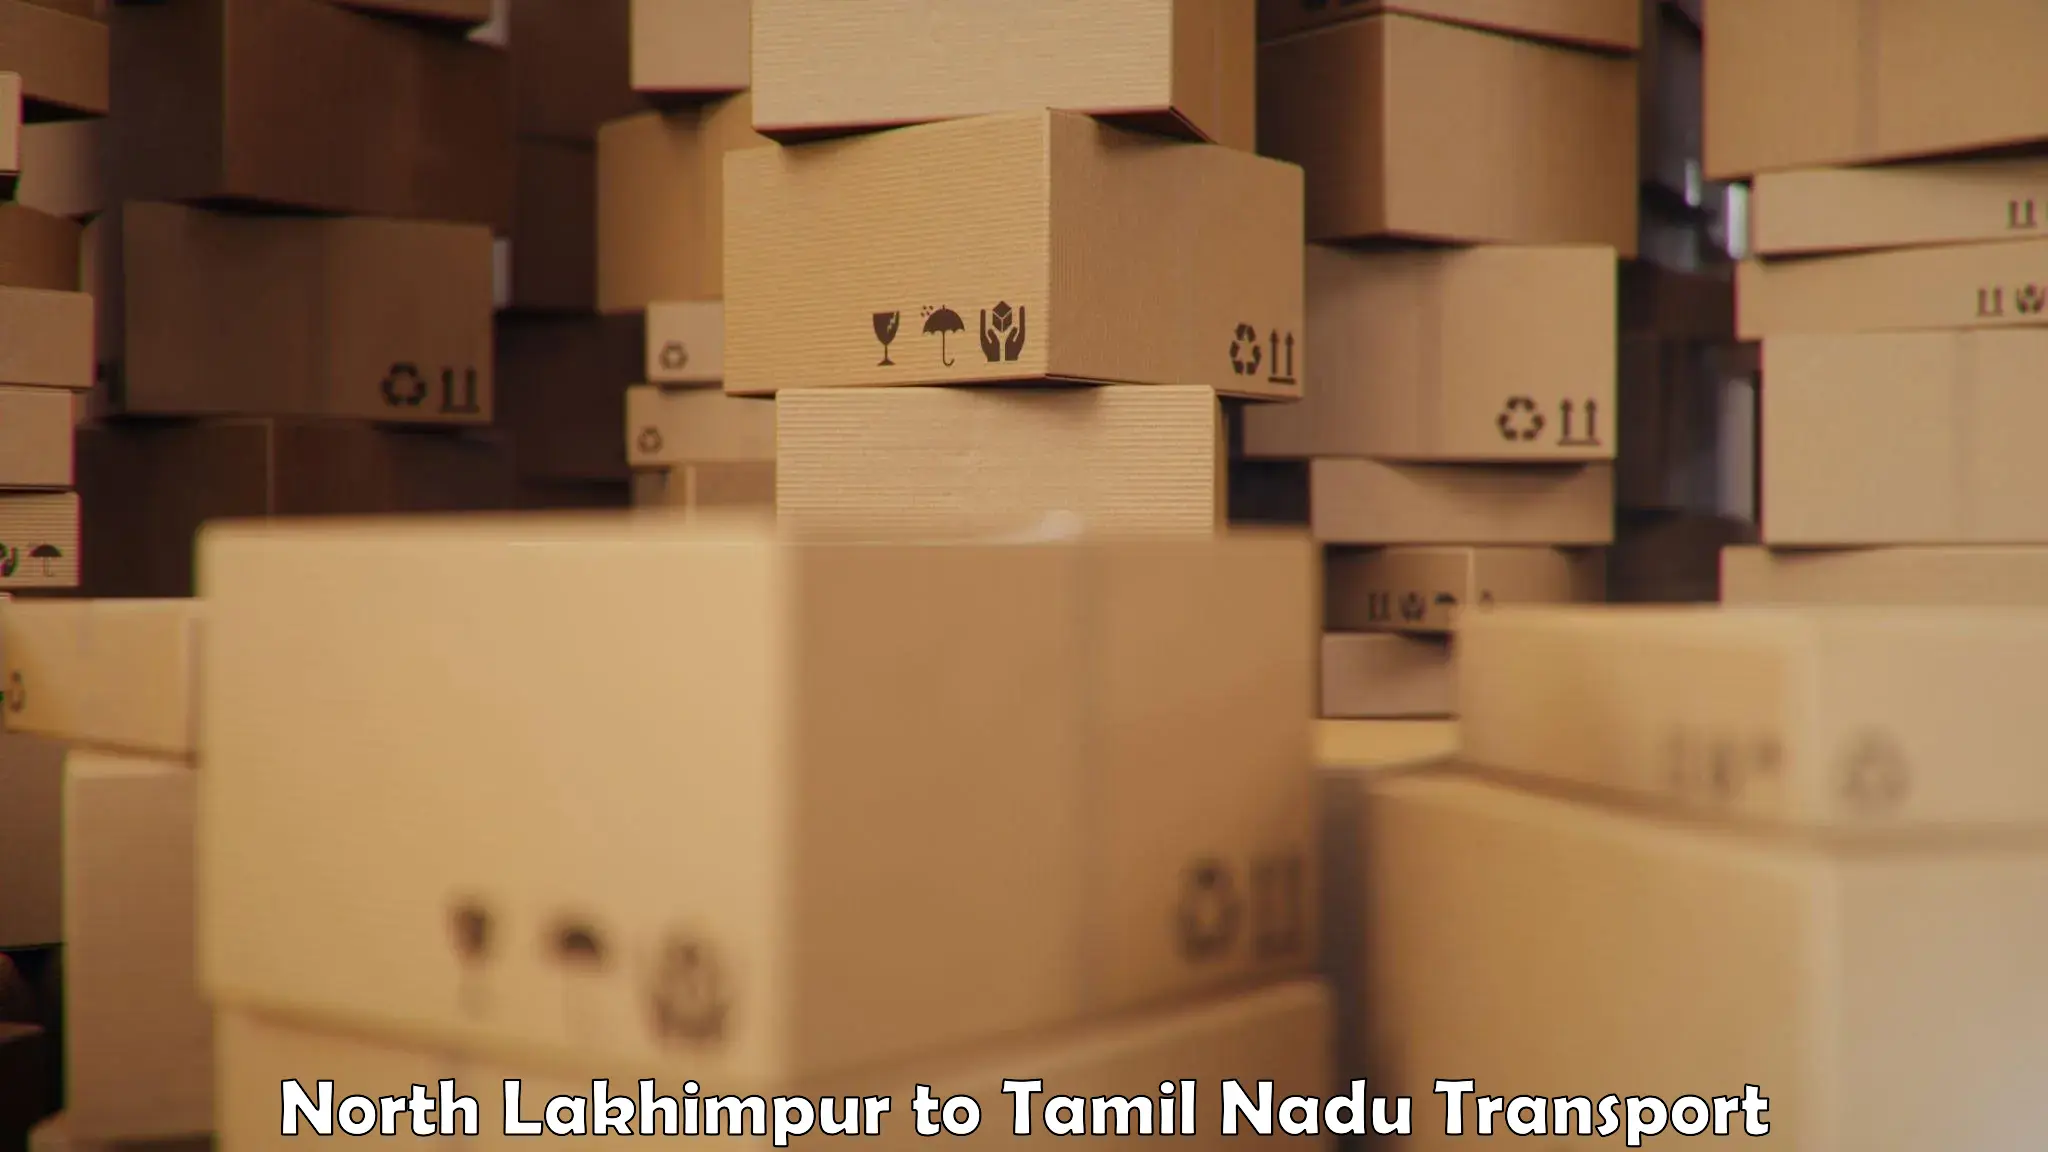 Package delivery services in North Lakhimpur to Tiruchirappalli